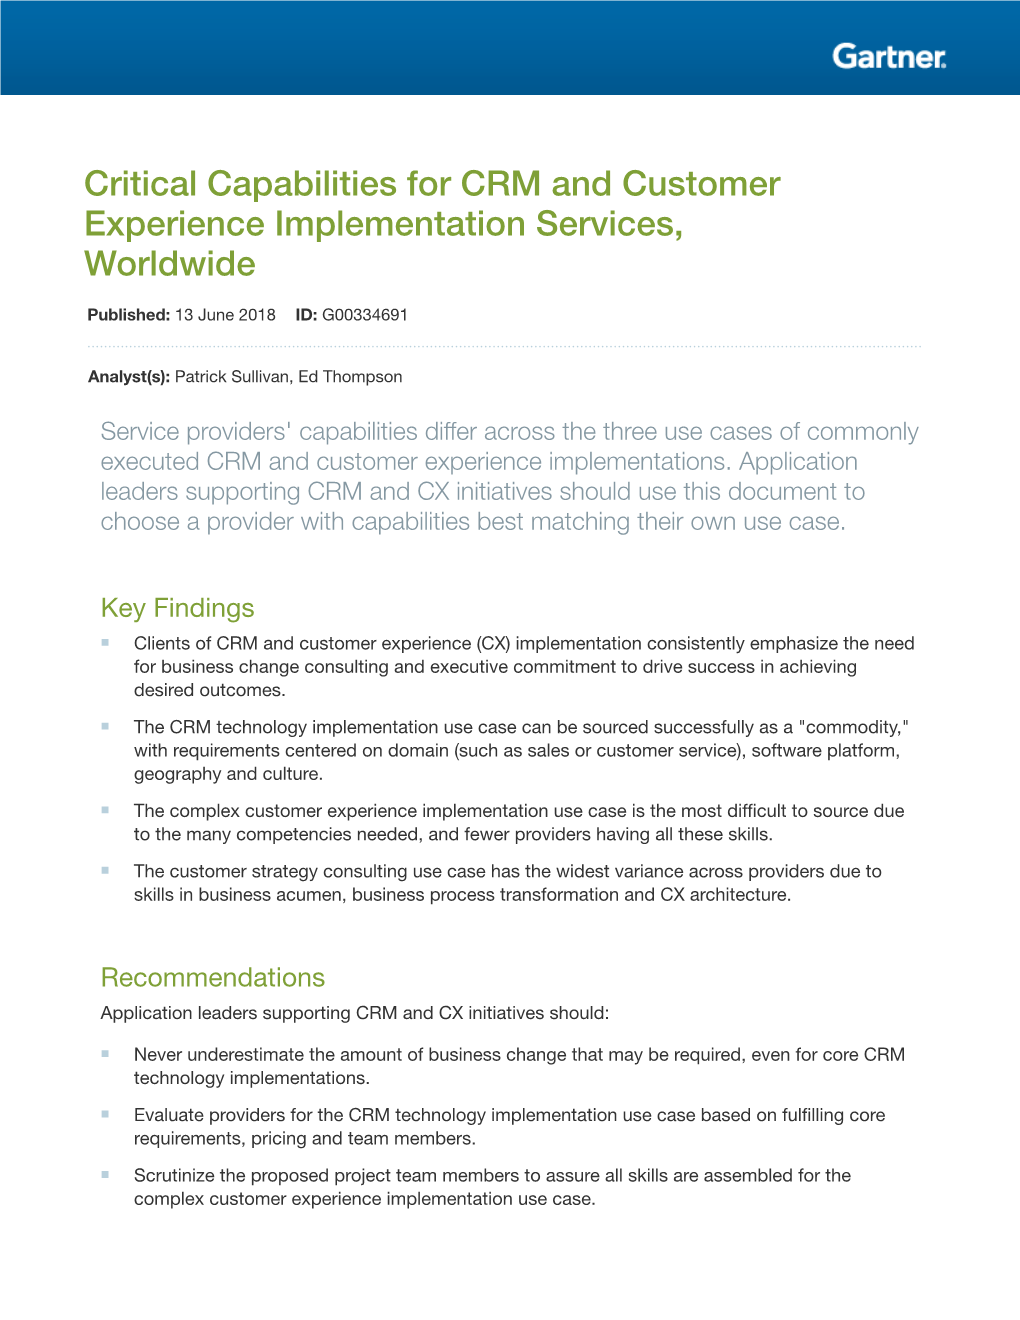 Critical Capabilities for CRM and Customer Experience Implementation Services, Worldwide